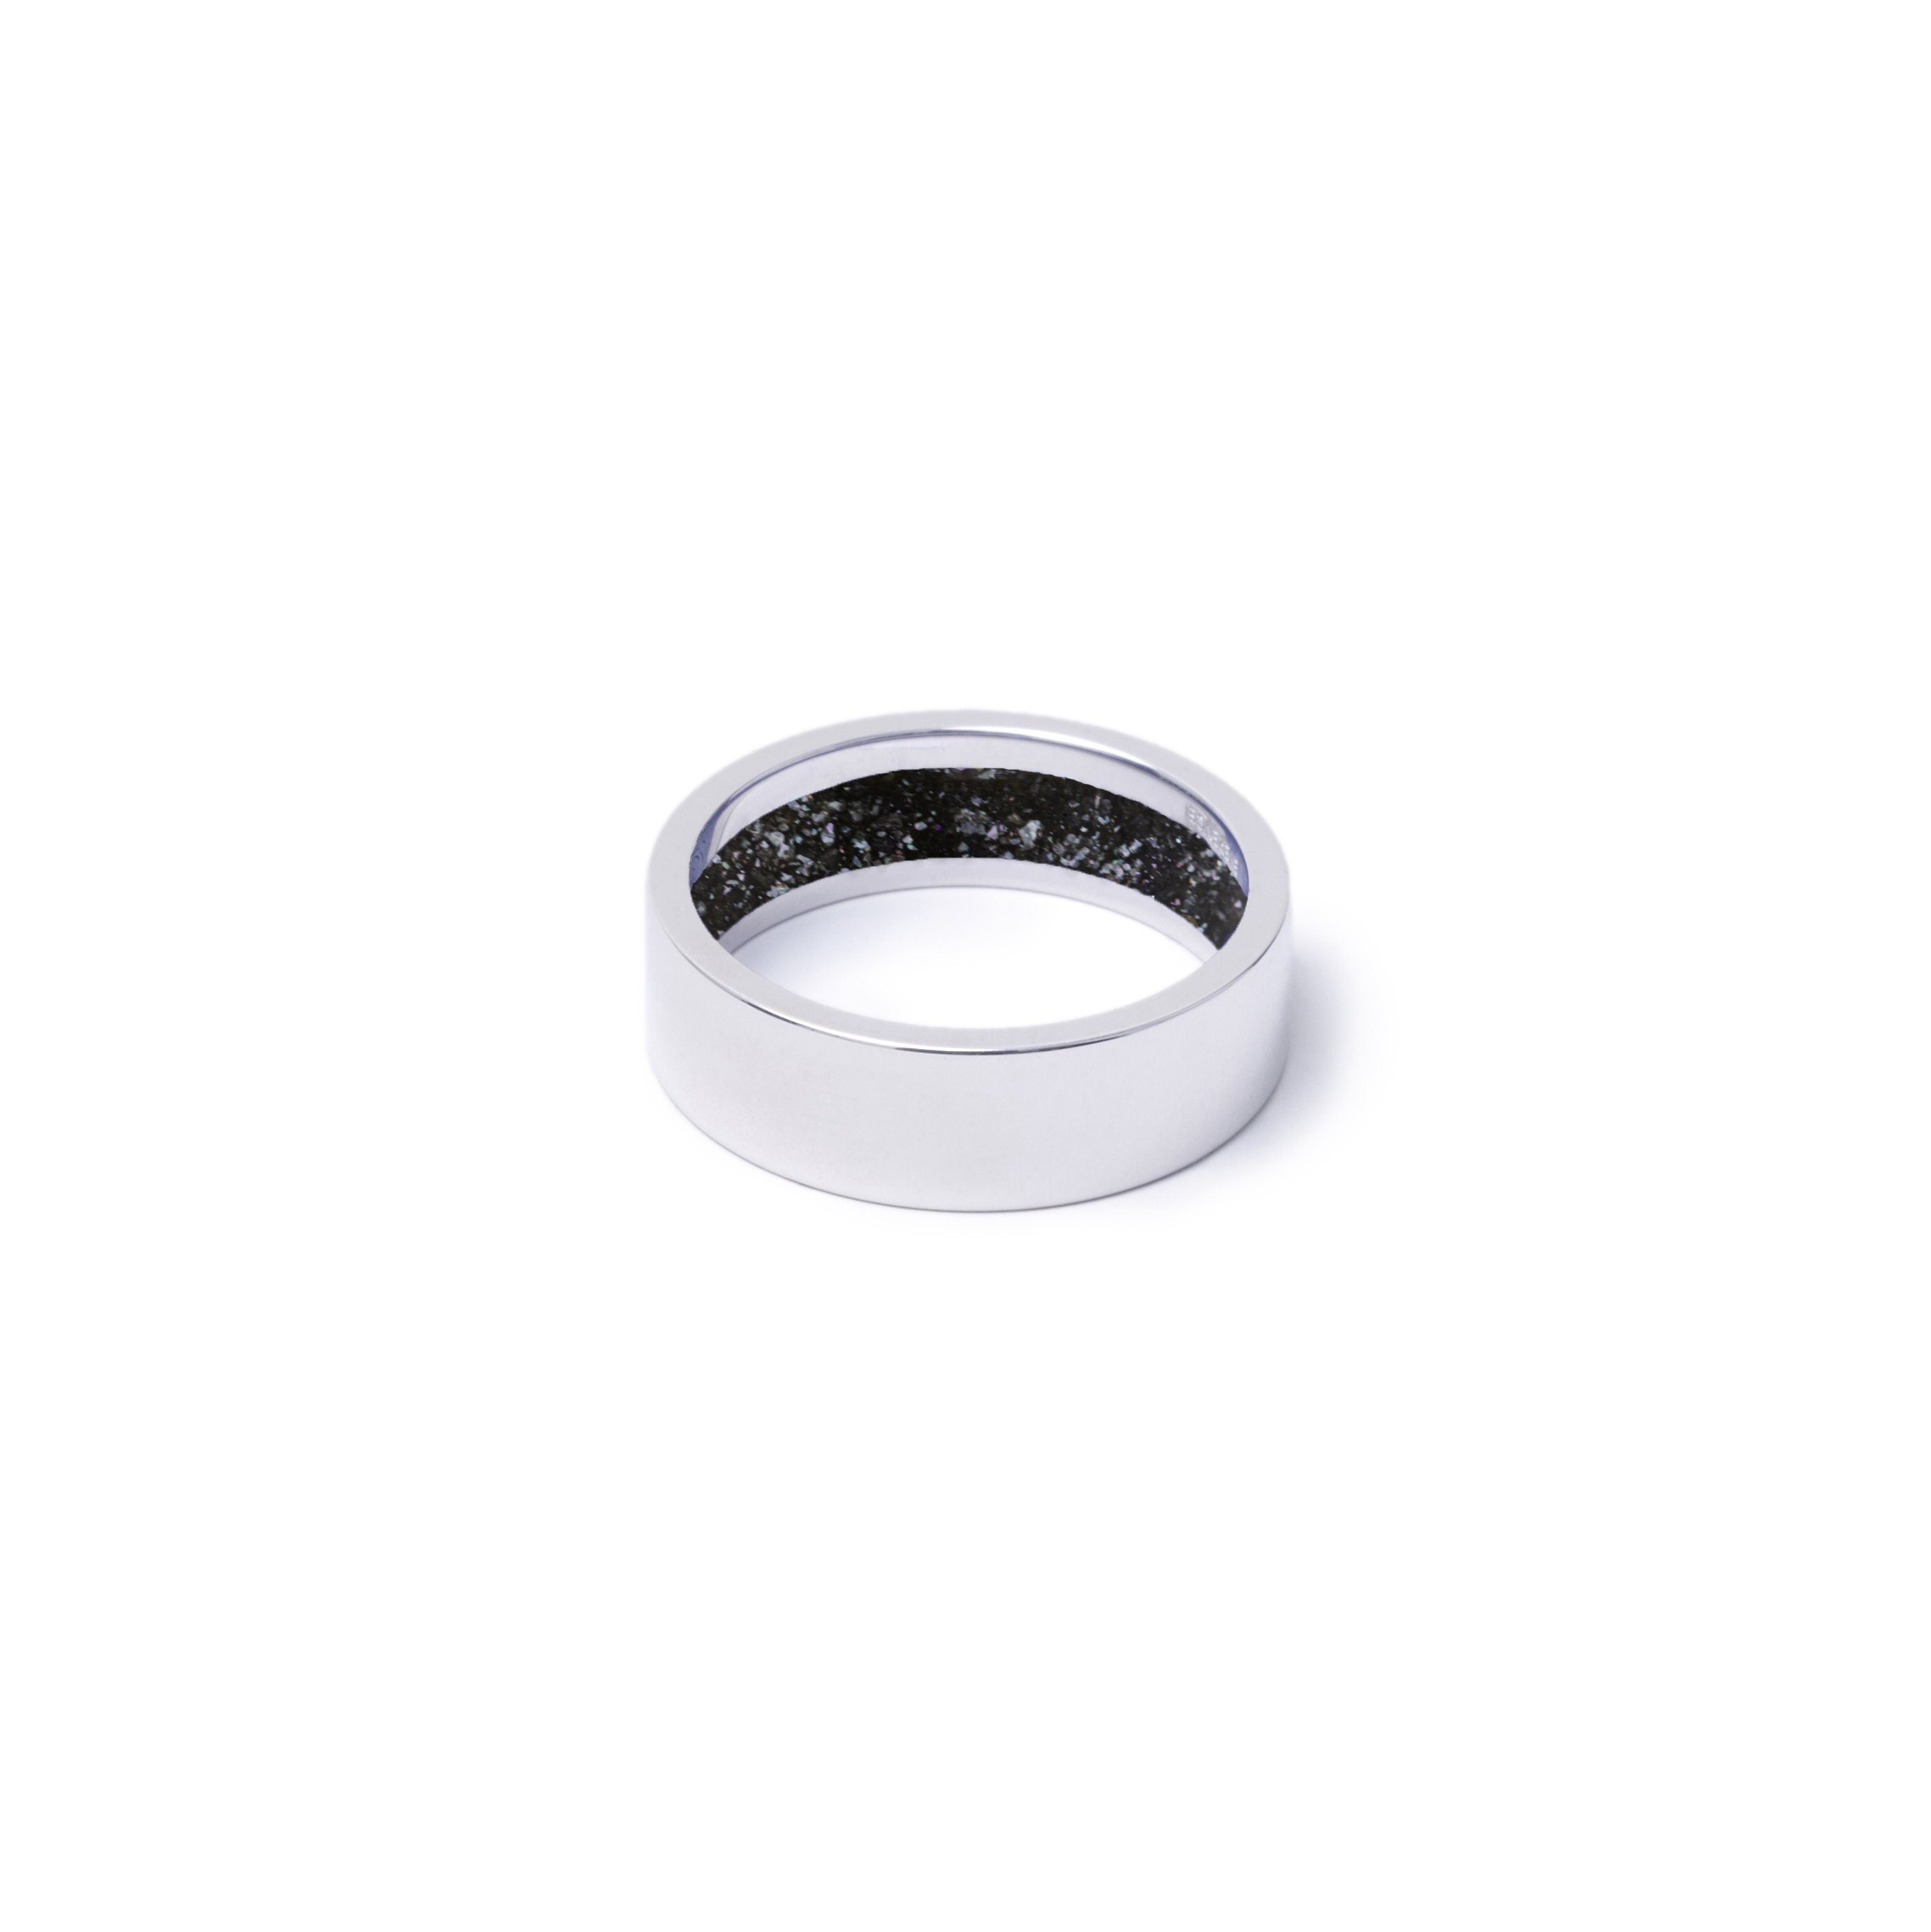 Everence Ring, 10k White Gold everence.life 6mm Charcoal 